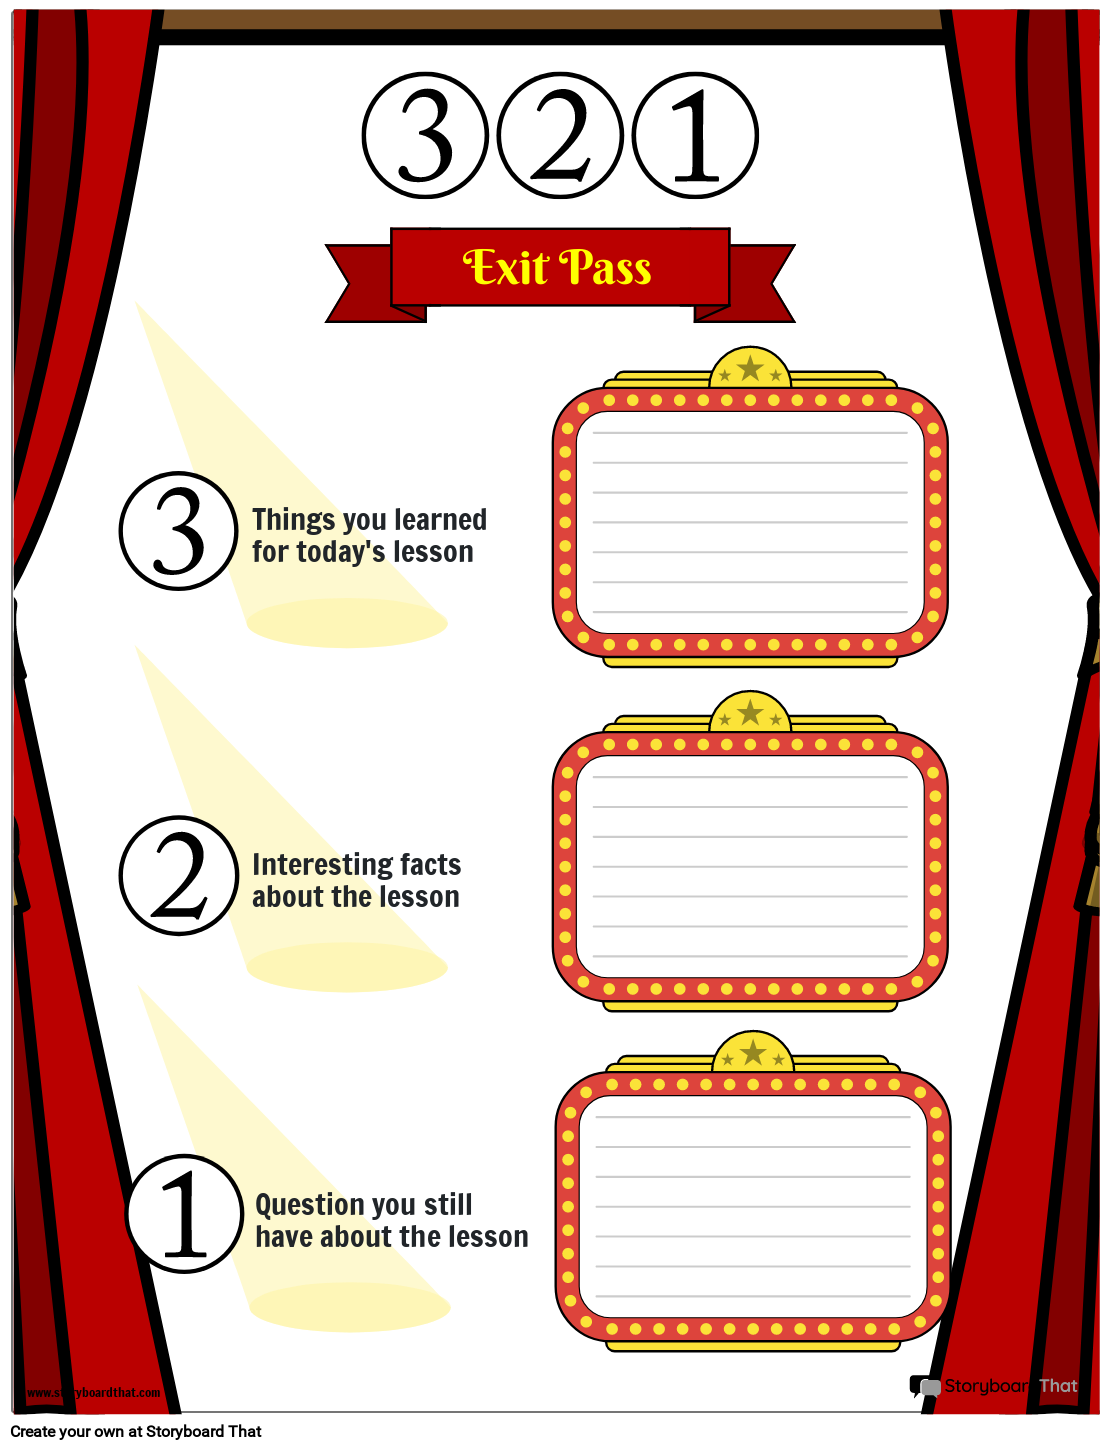 Theatre Stage Bell Ringer Practice Template